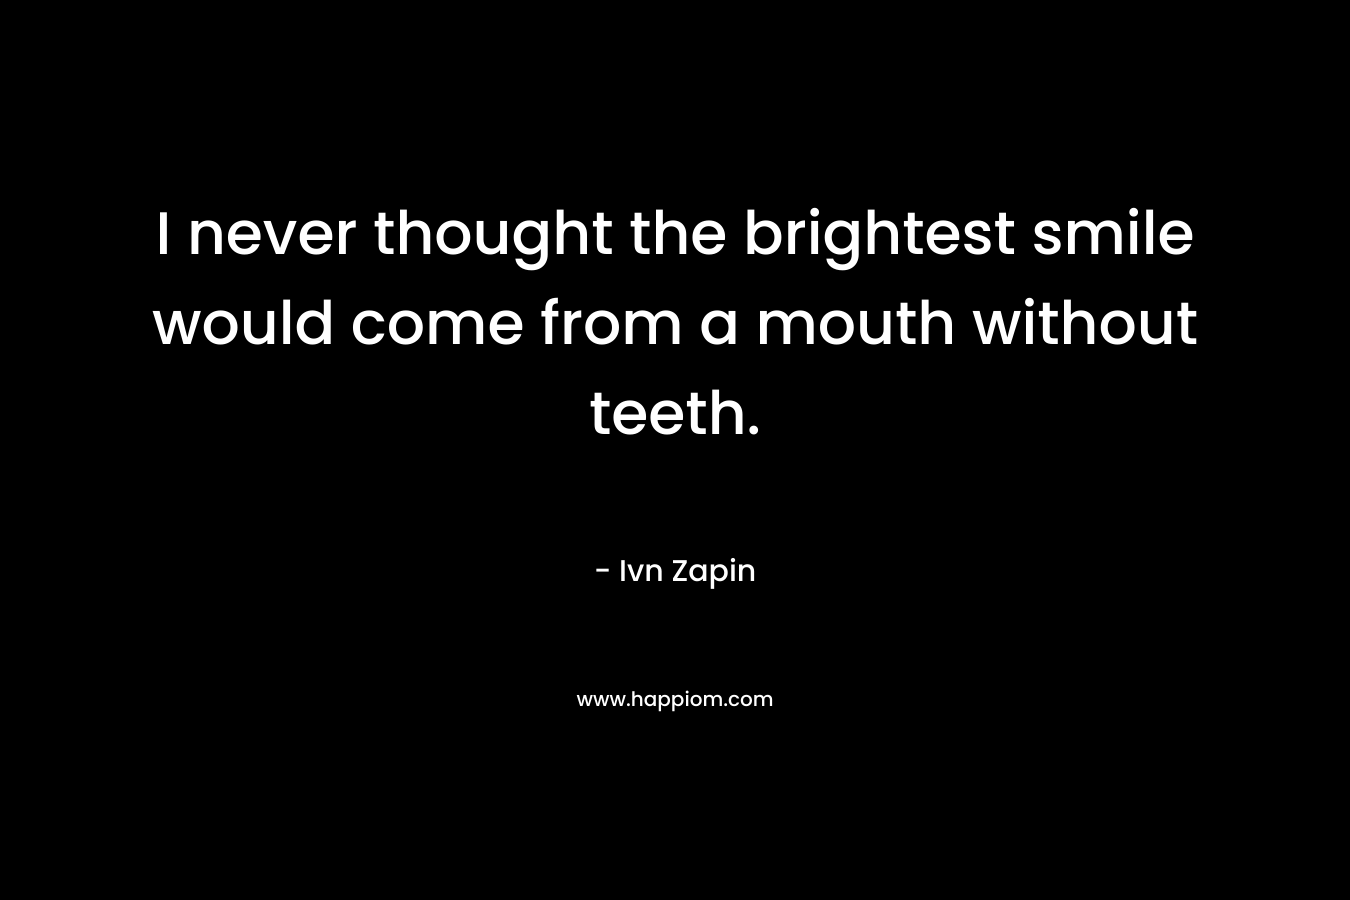 I never thought the brightest smile would come from a mouth without teeth. – Ivn Zapin